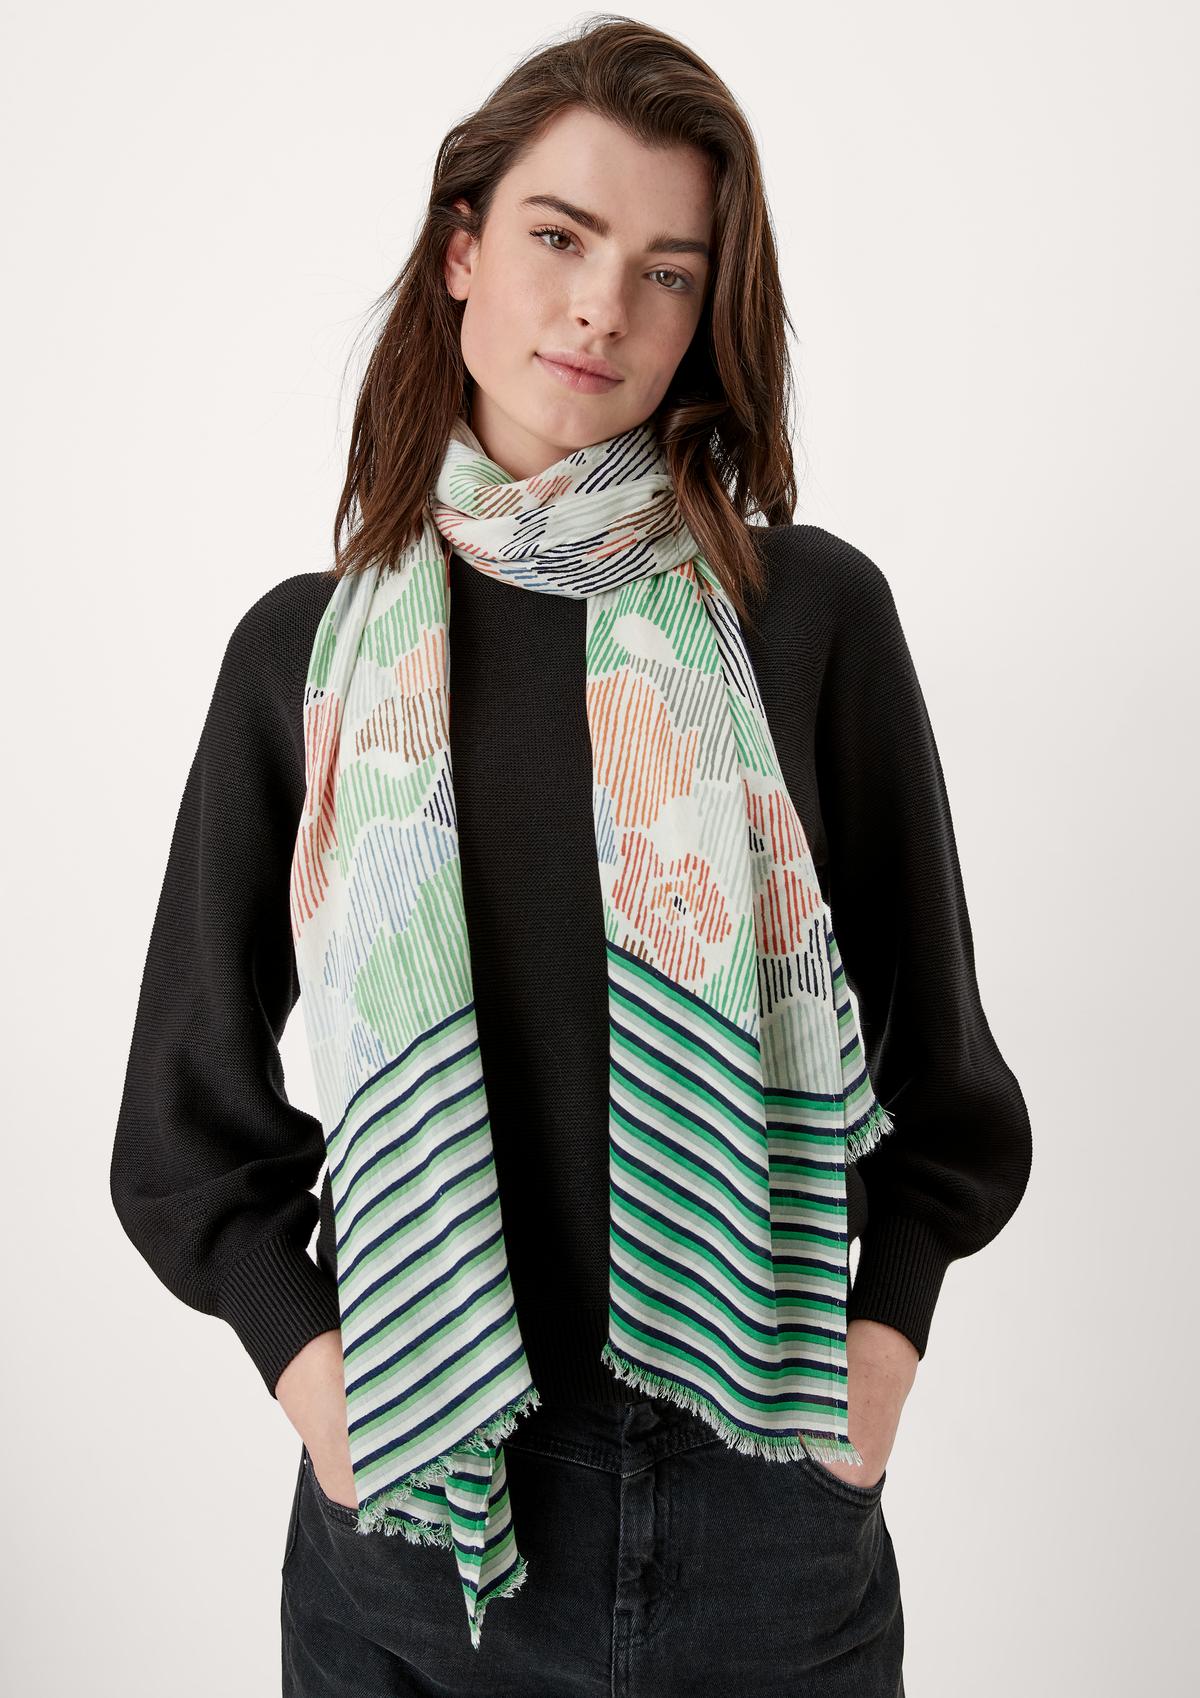 s.Oliver Scarf in a mixed pattern design